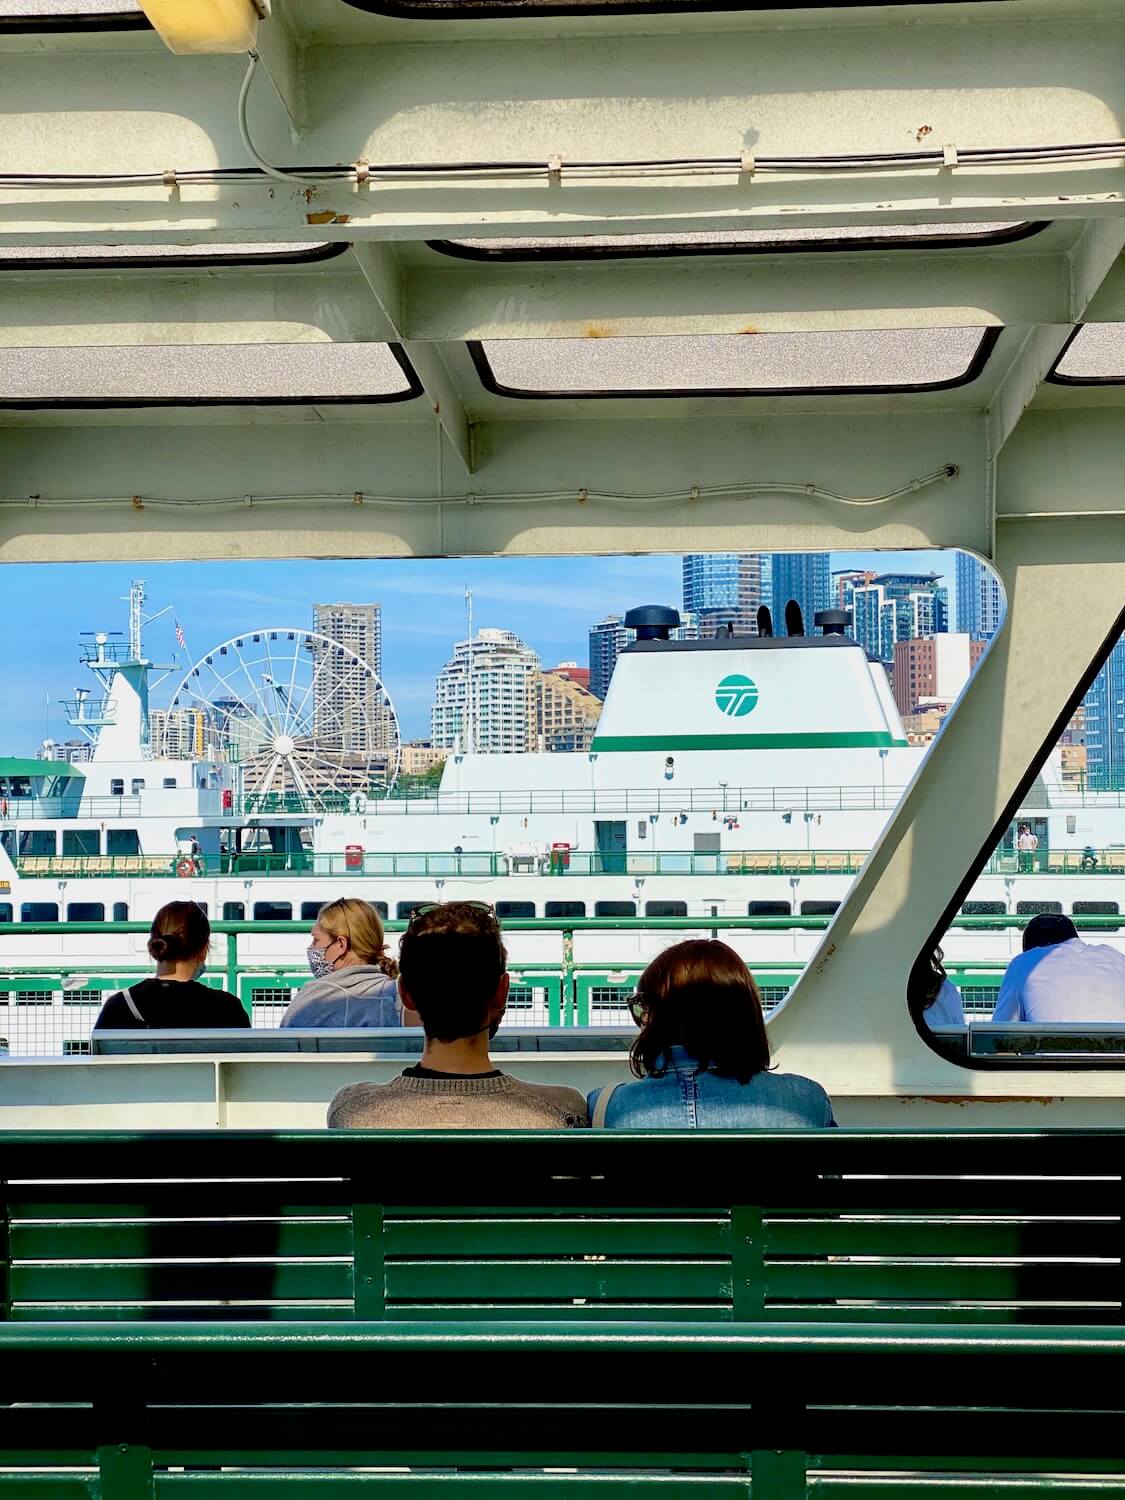 Ferry passengers look out toward Downtown Seattle as the ferry prepares to navigate it's way to a destination on the other side of the Puget Sound. The benches are painted green and another ferry is in the background, just in front of Seattle's Big Wheel attraction downtown.